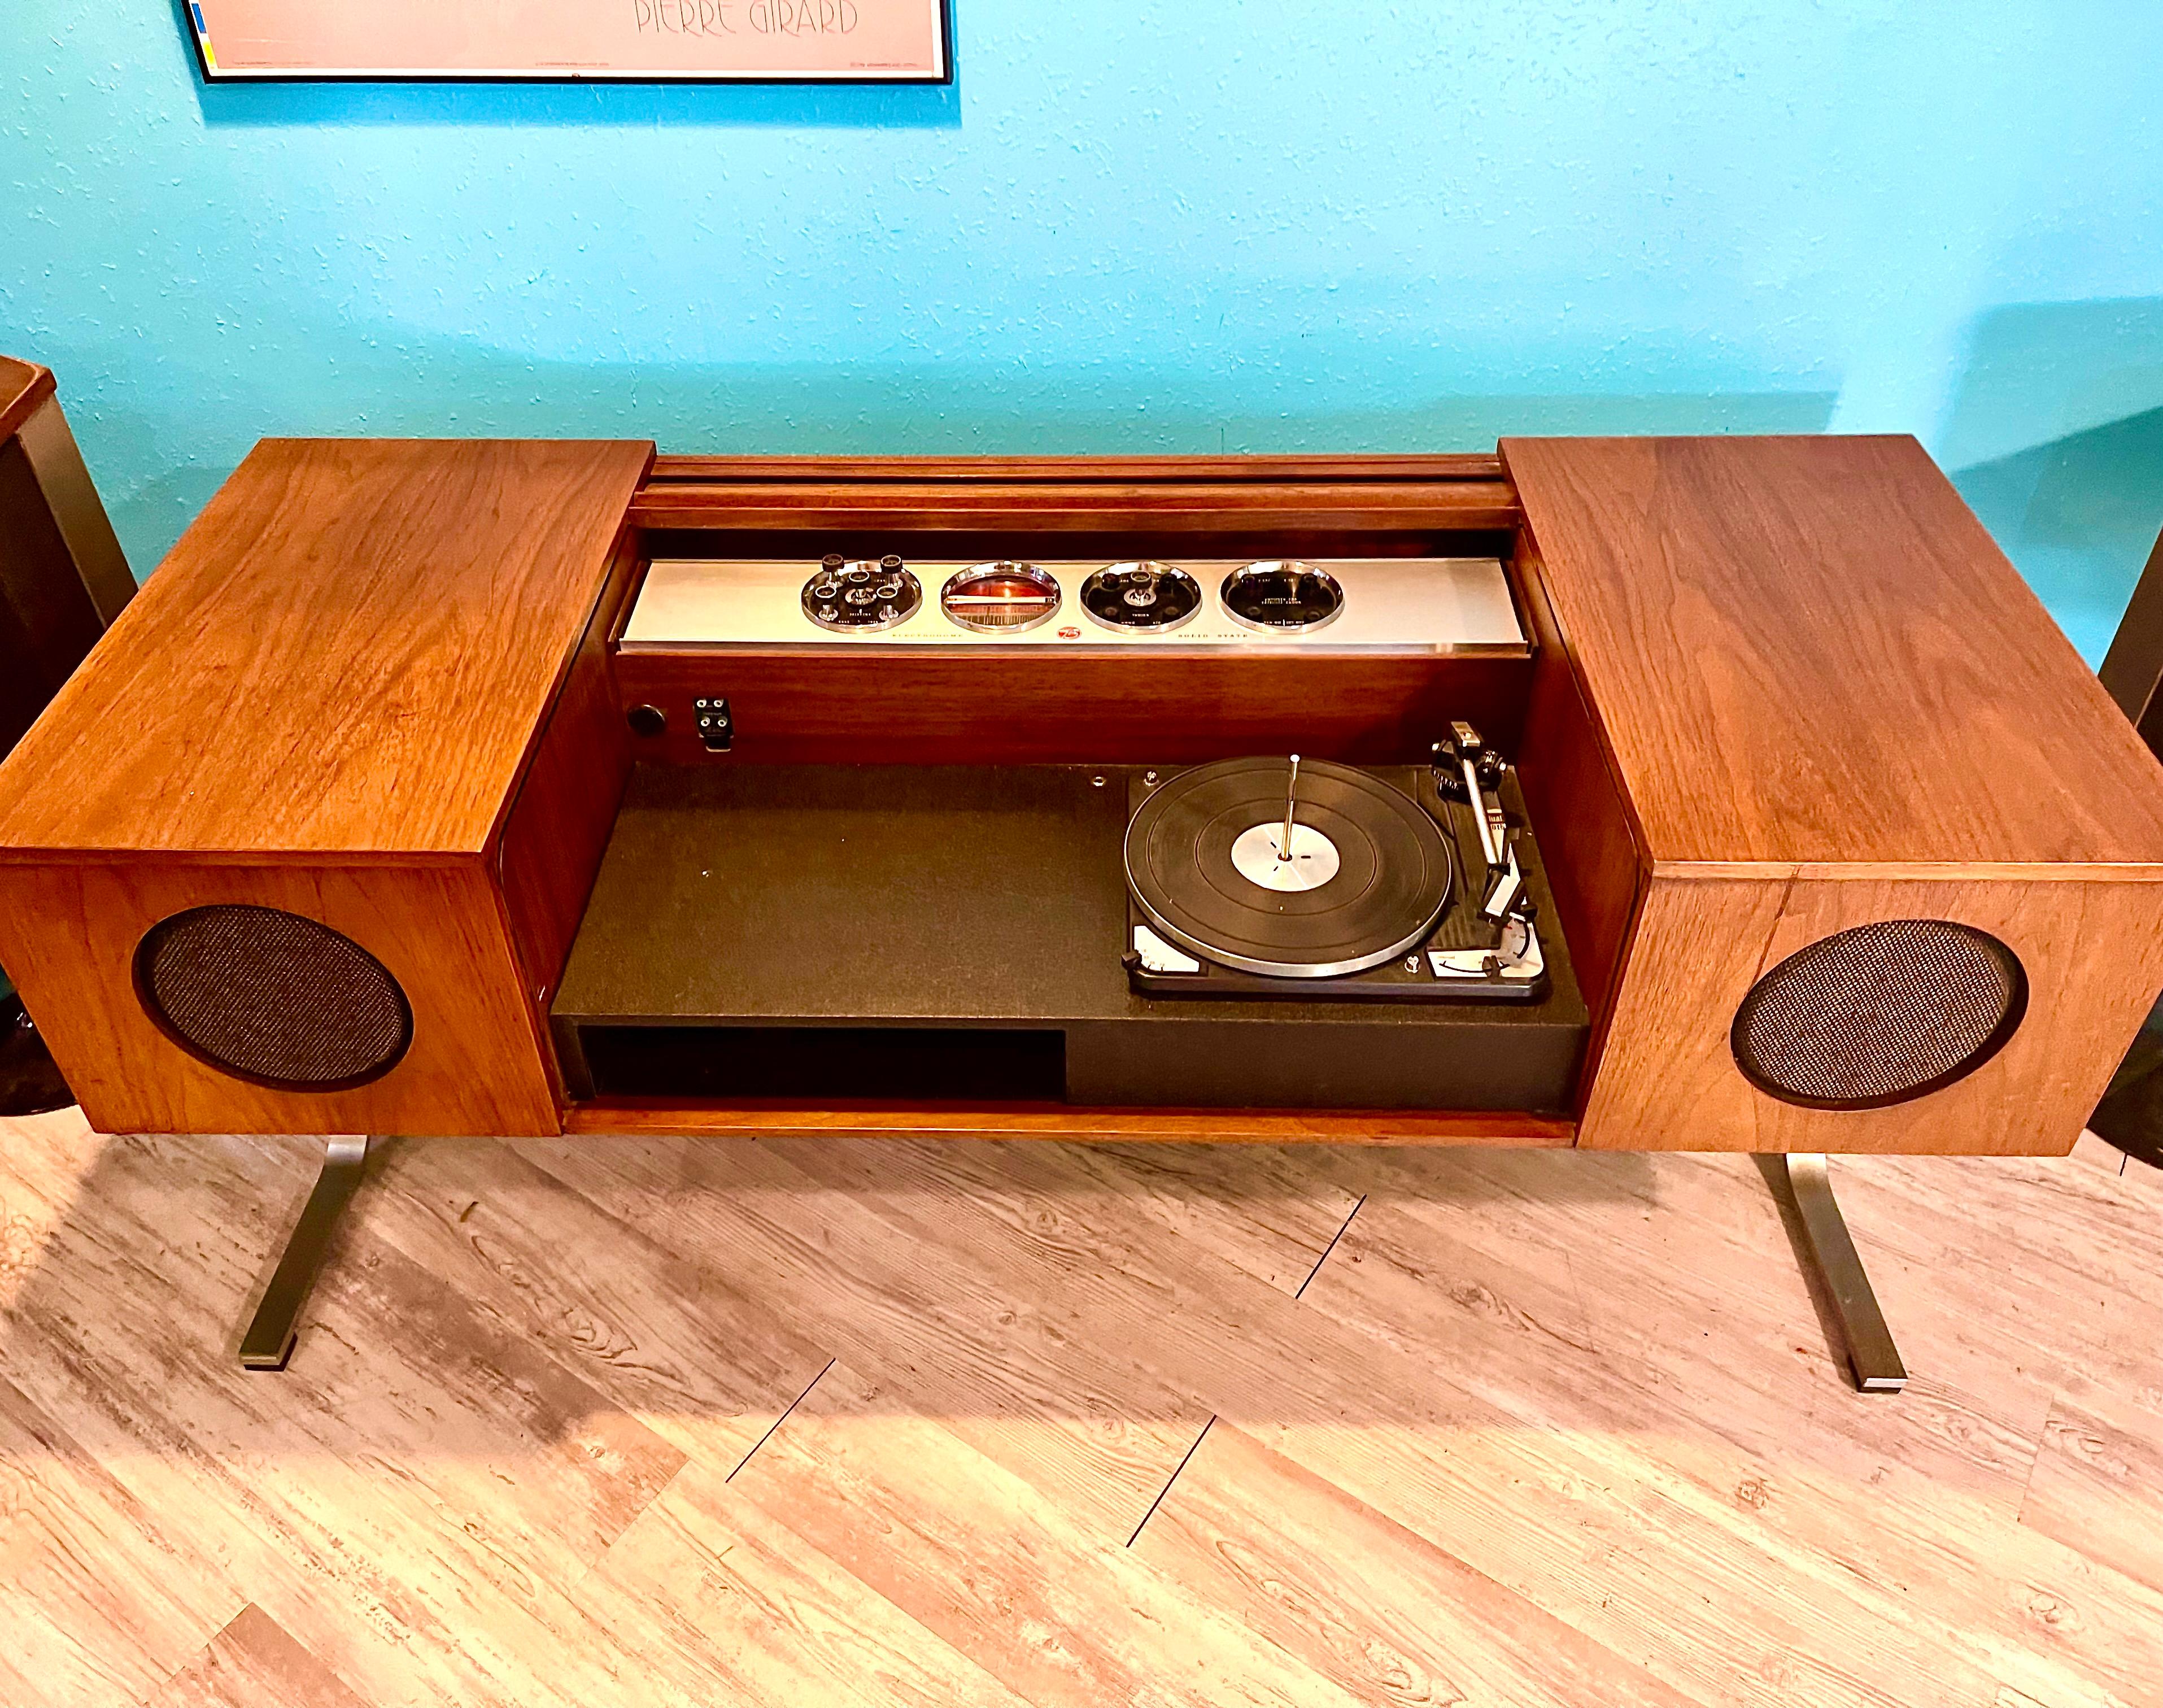 20th Century Electrohome 701 Circa 75 stereo console radio record player (eames baughman lk) For Sale